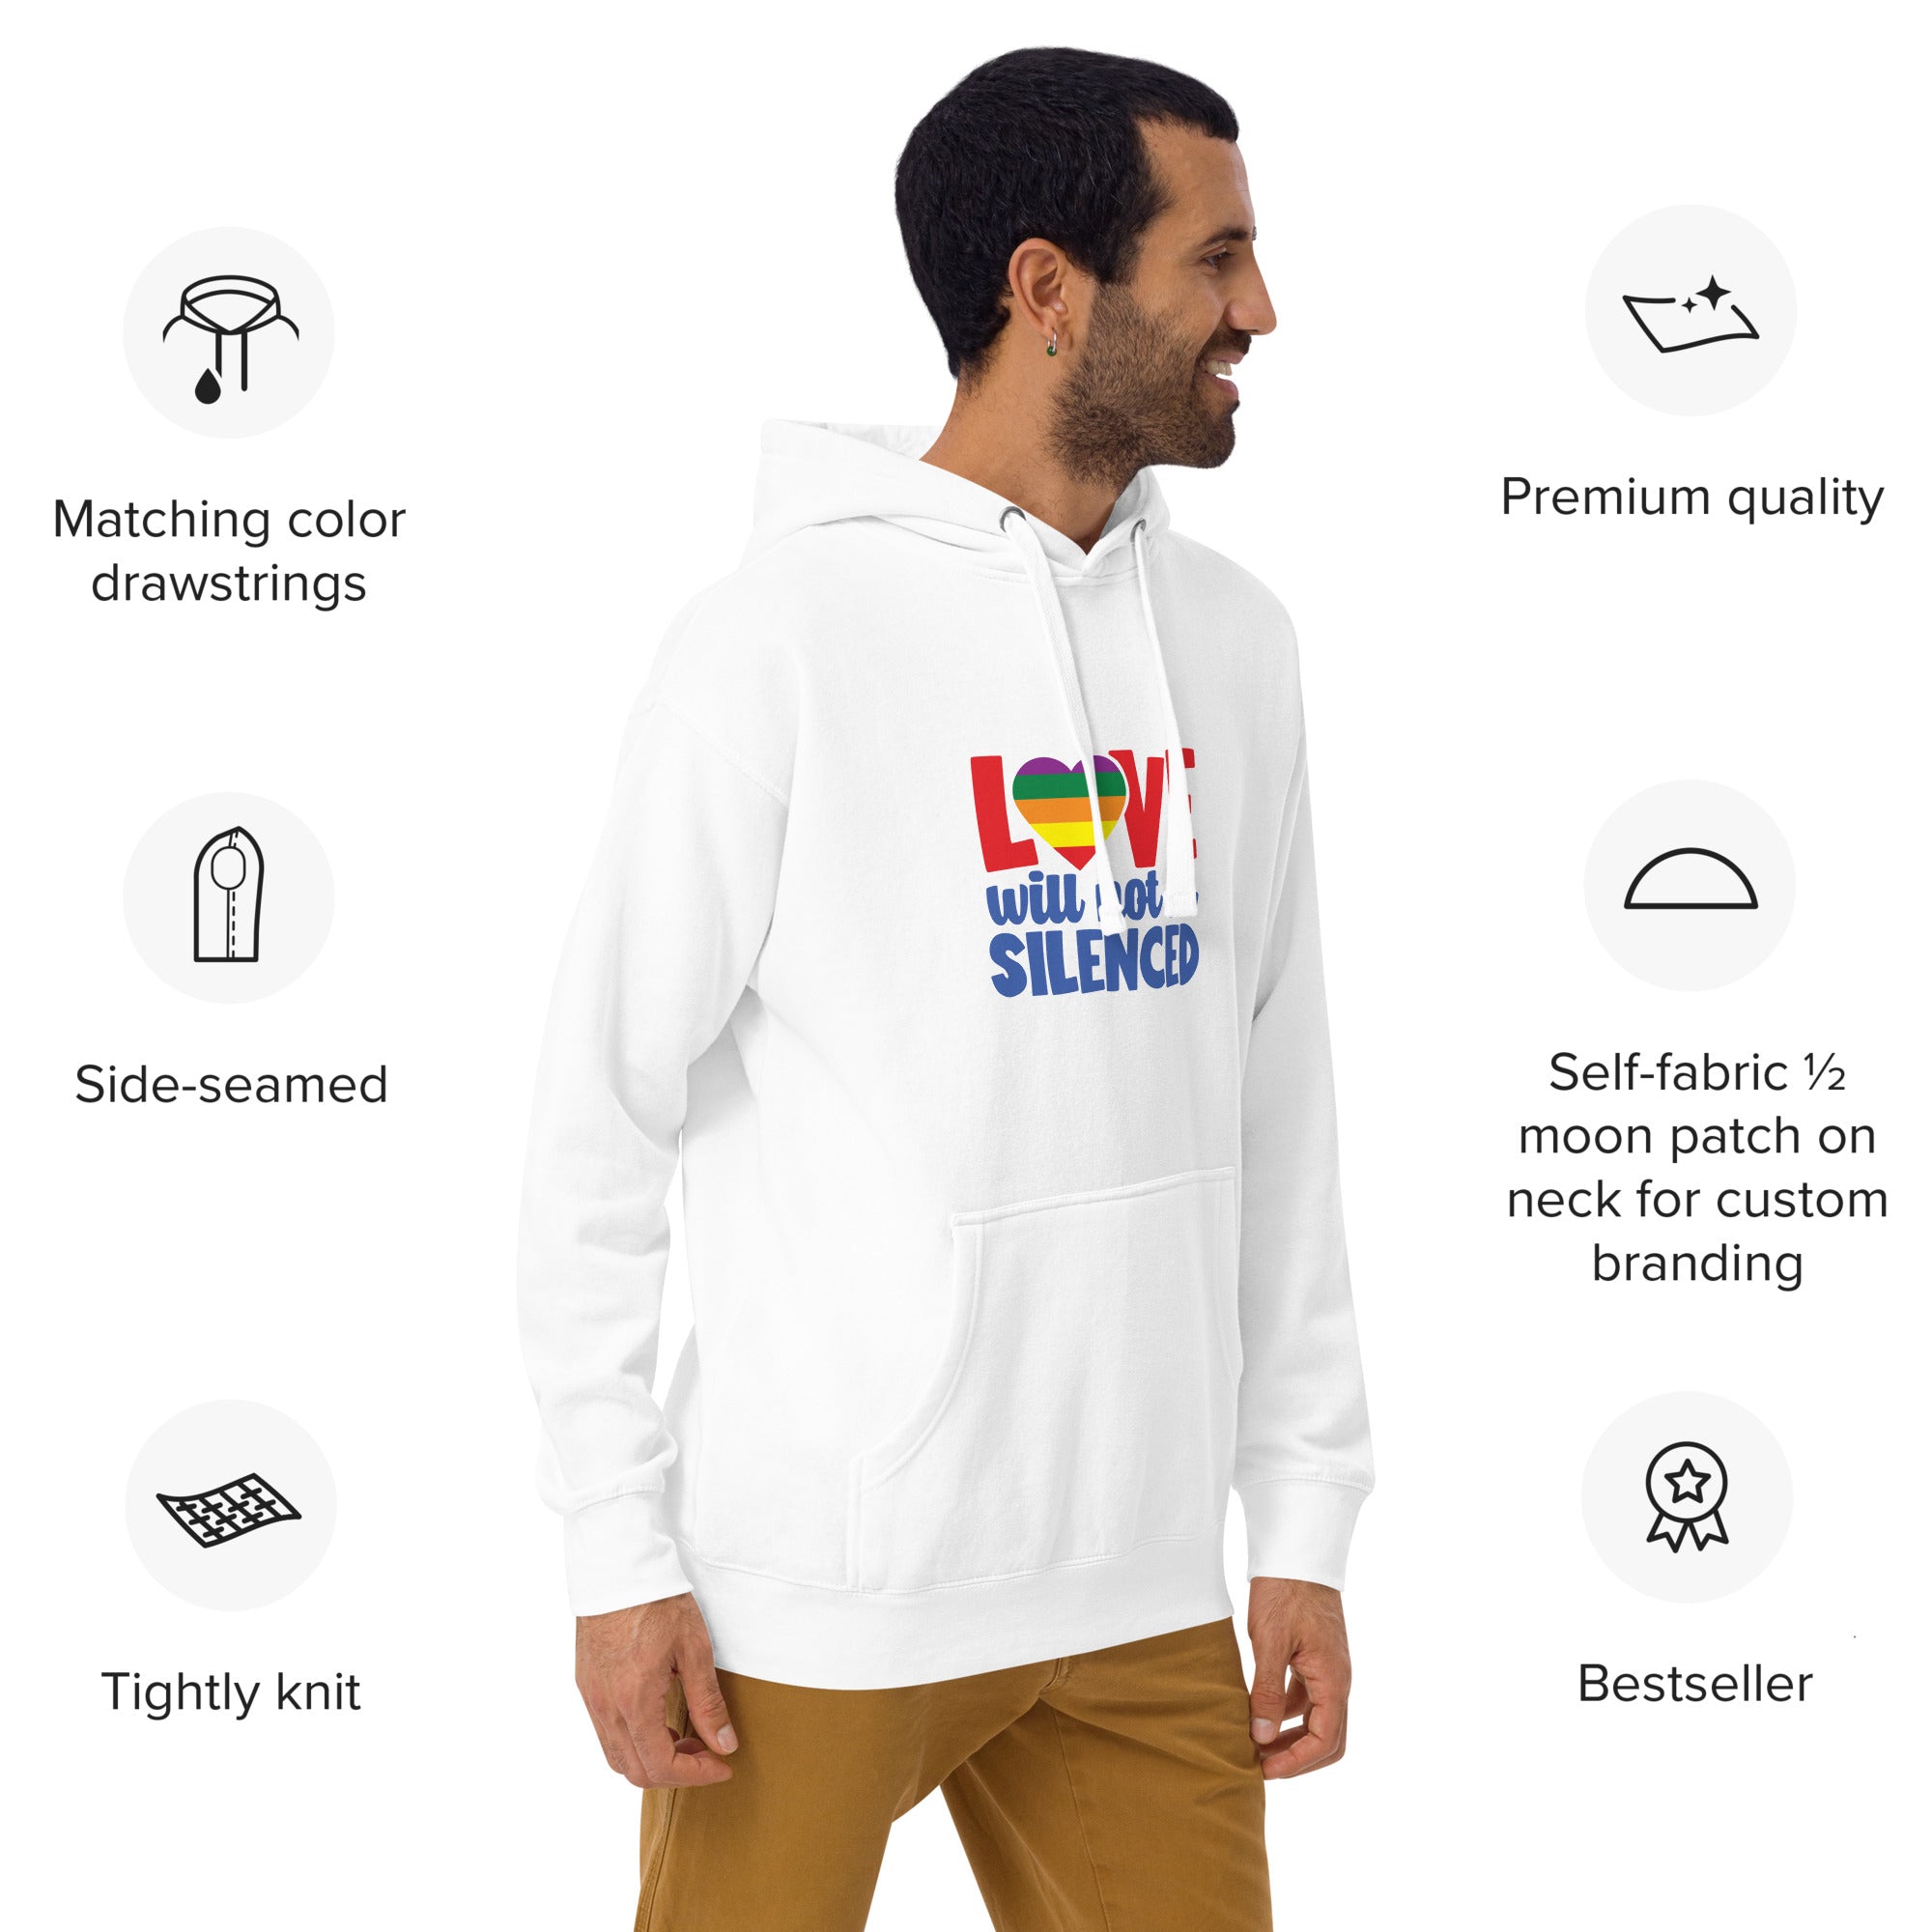 Unisex Hoodie- Love will not be silenced